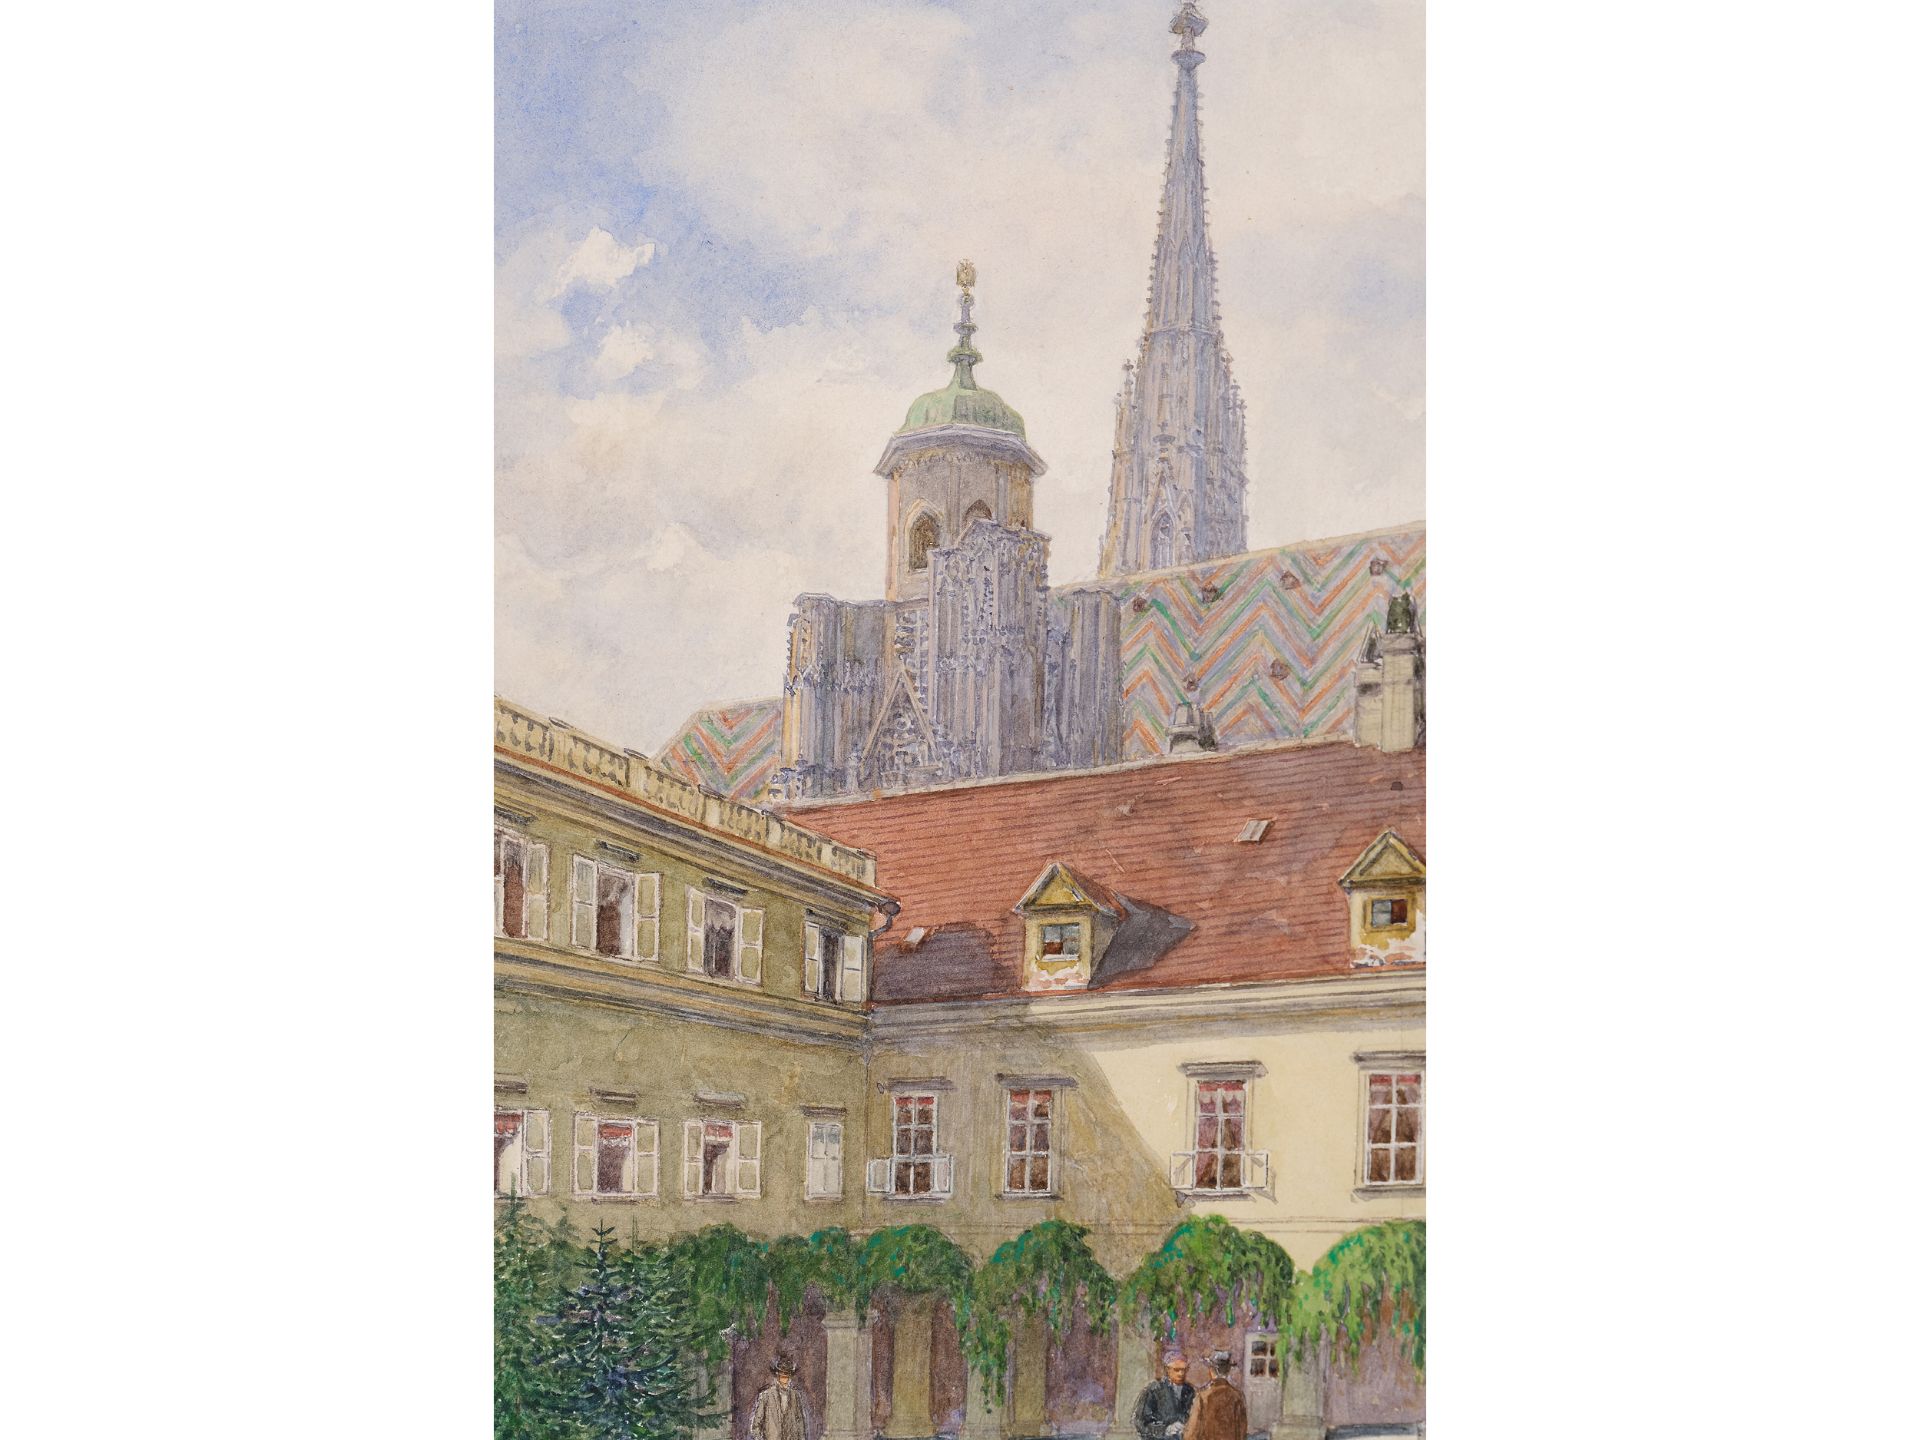 Felix Riedel, 
Vienna 1878 - 1950 Vienna, 
Court of the Kurnhauser with the St. Stephen's Cathedral - Image 3 of 6